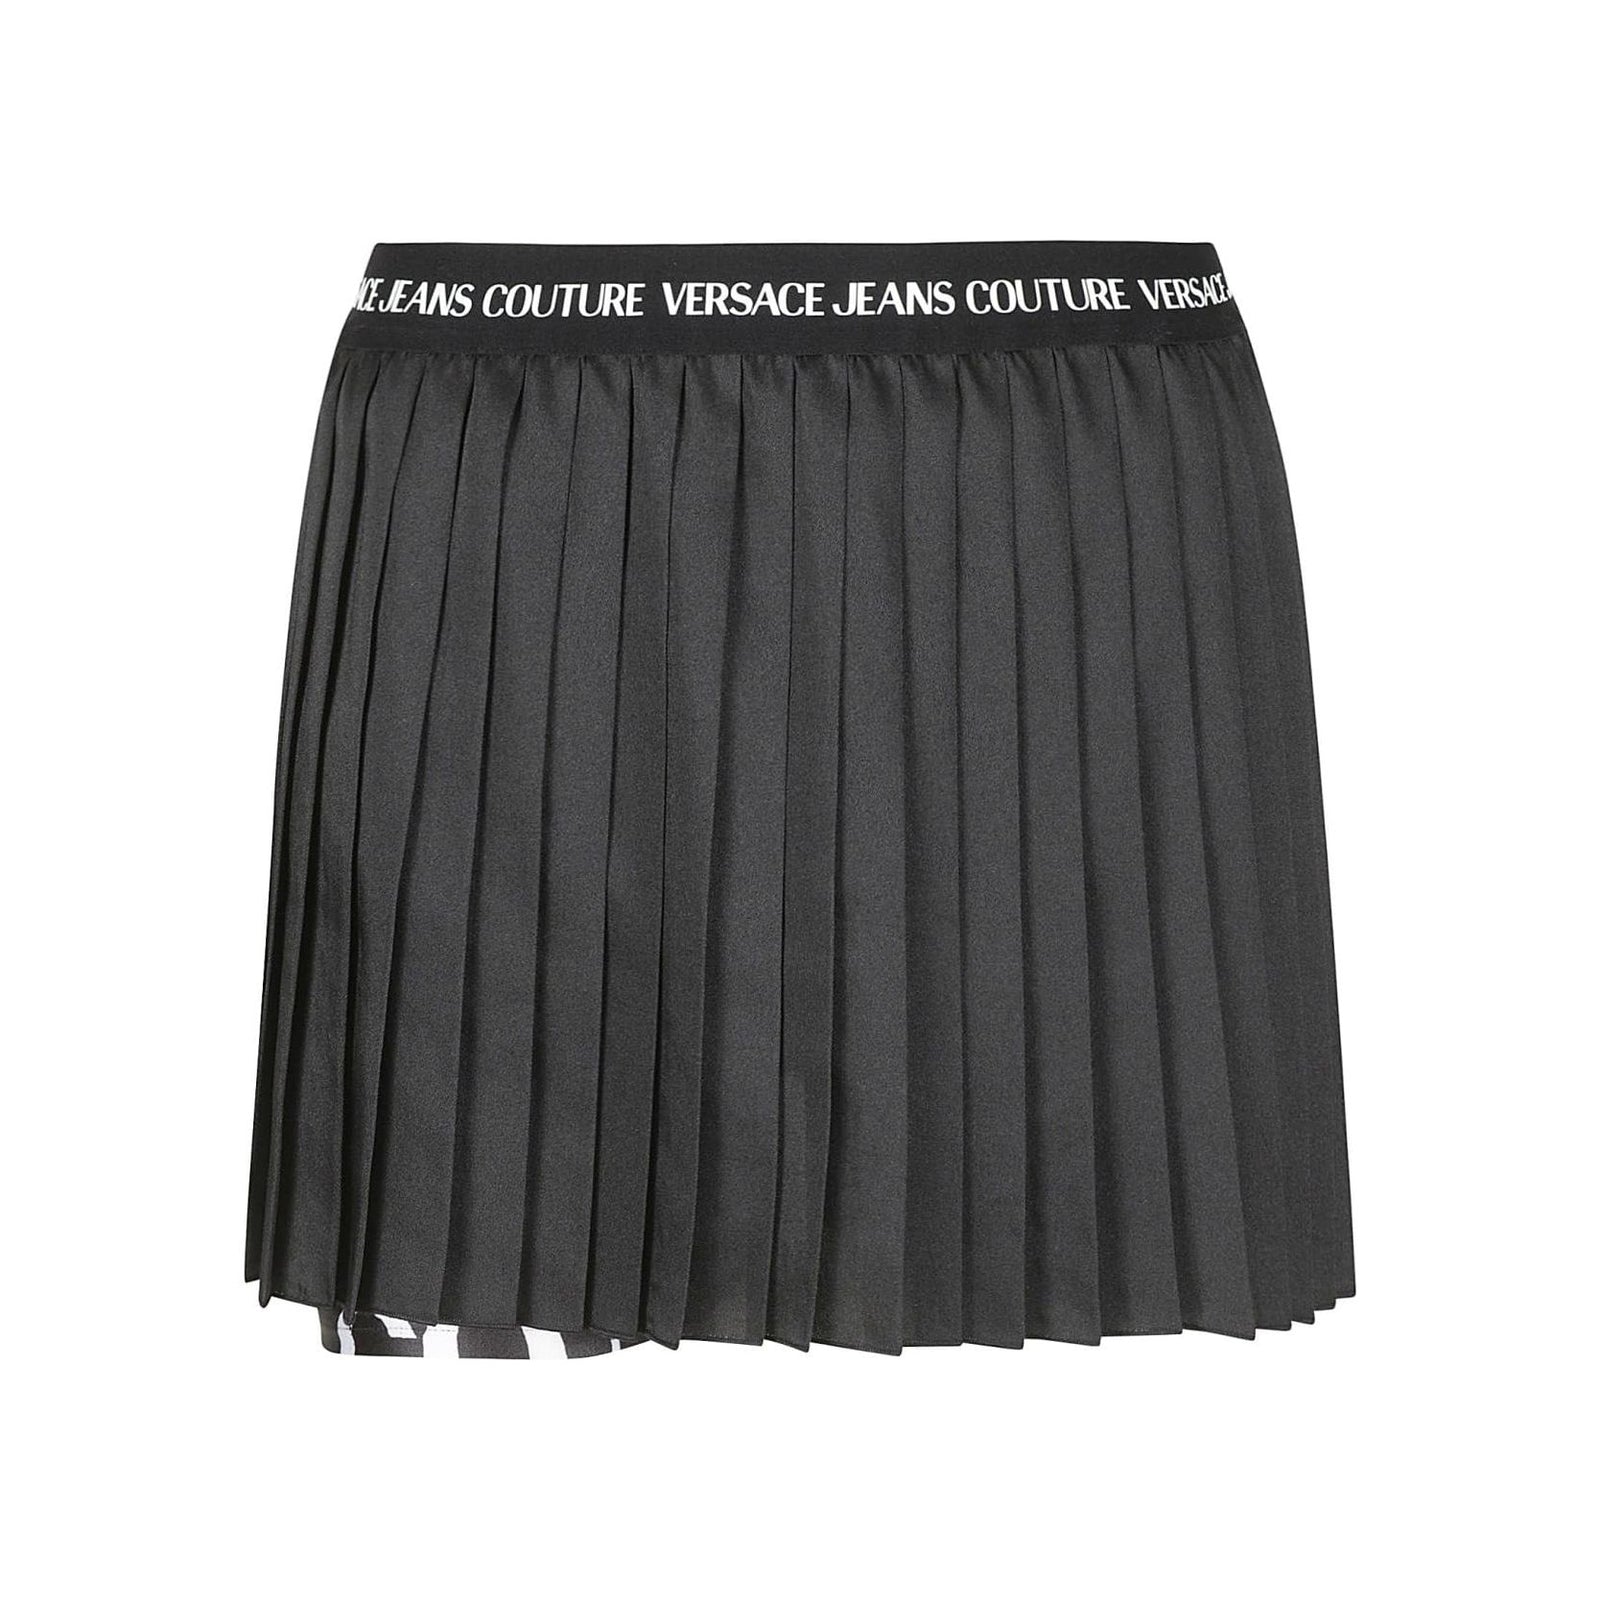 VERSACE JEANS COUTURE COUTURE PLEATED MINI SKIRT - Yooto